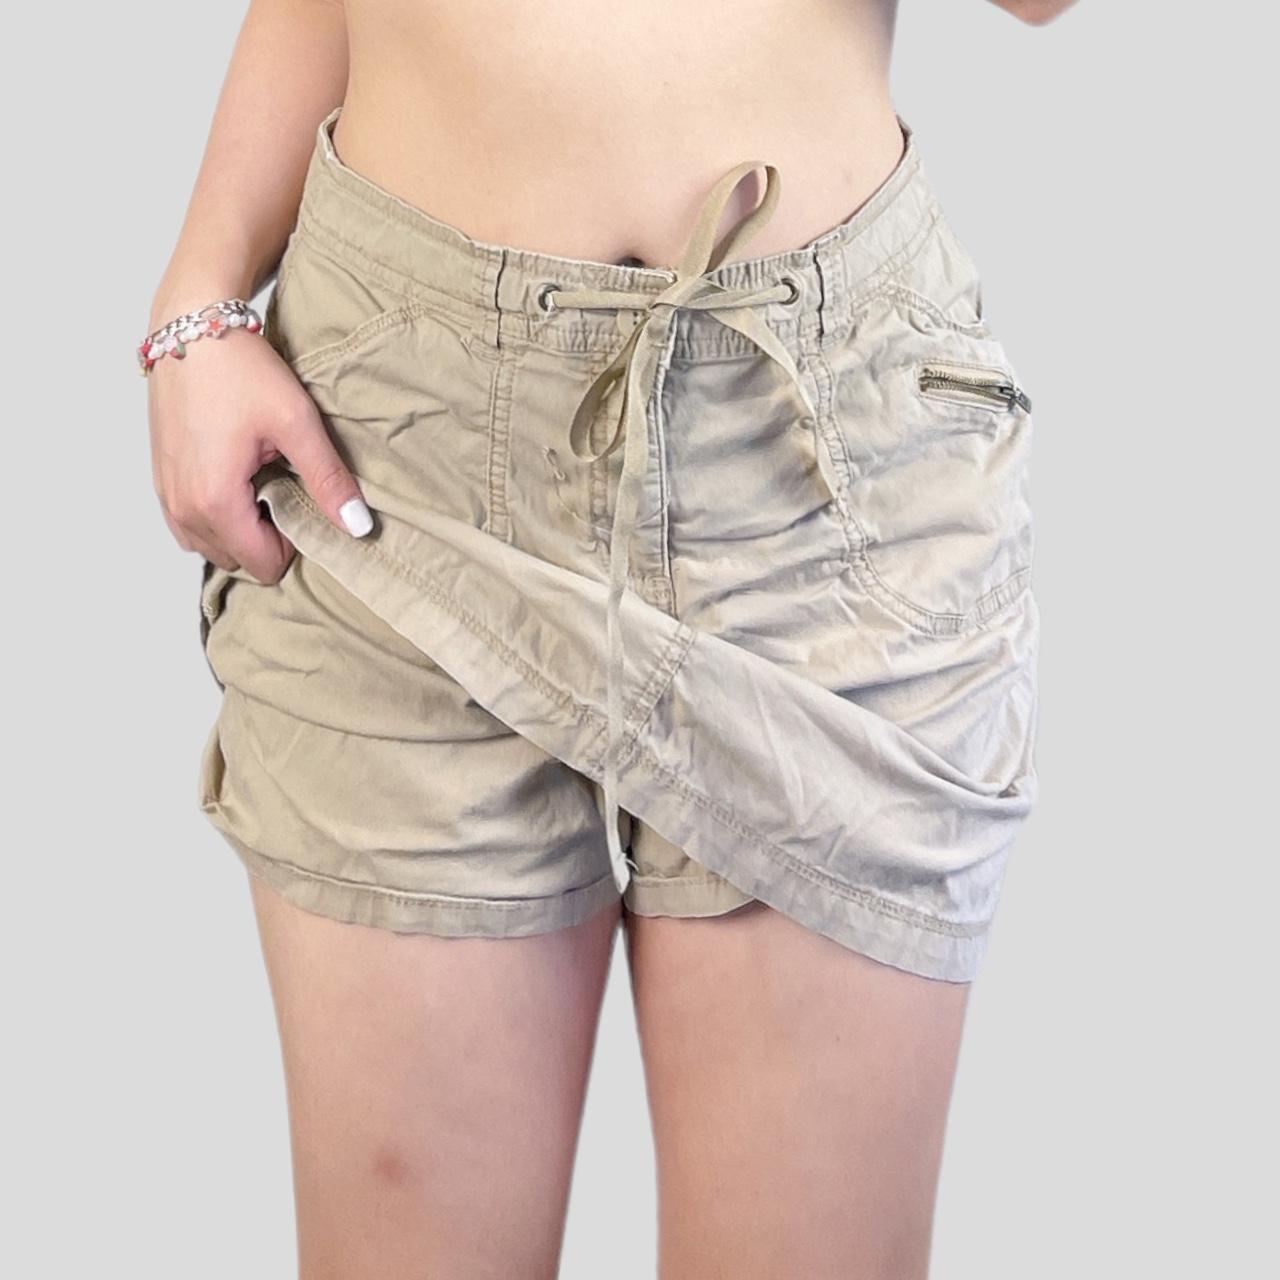 Product Image 2 - Y2k earthcore mini cargo skirt

in